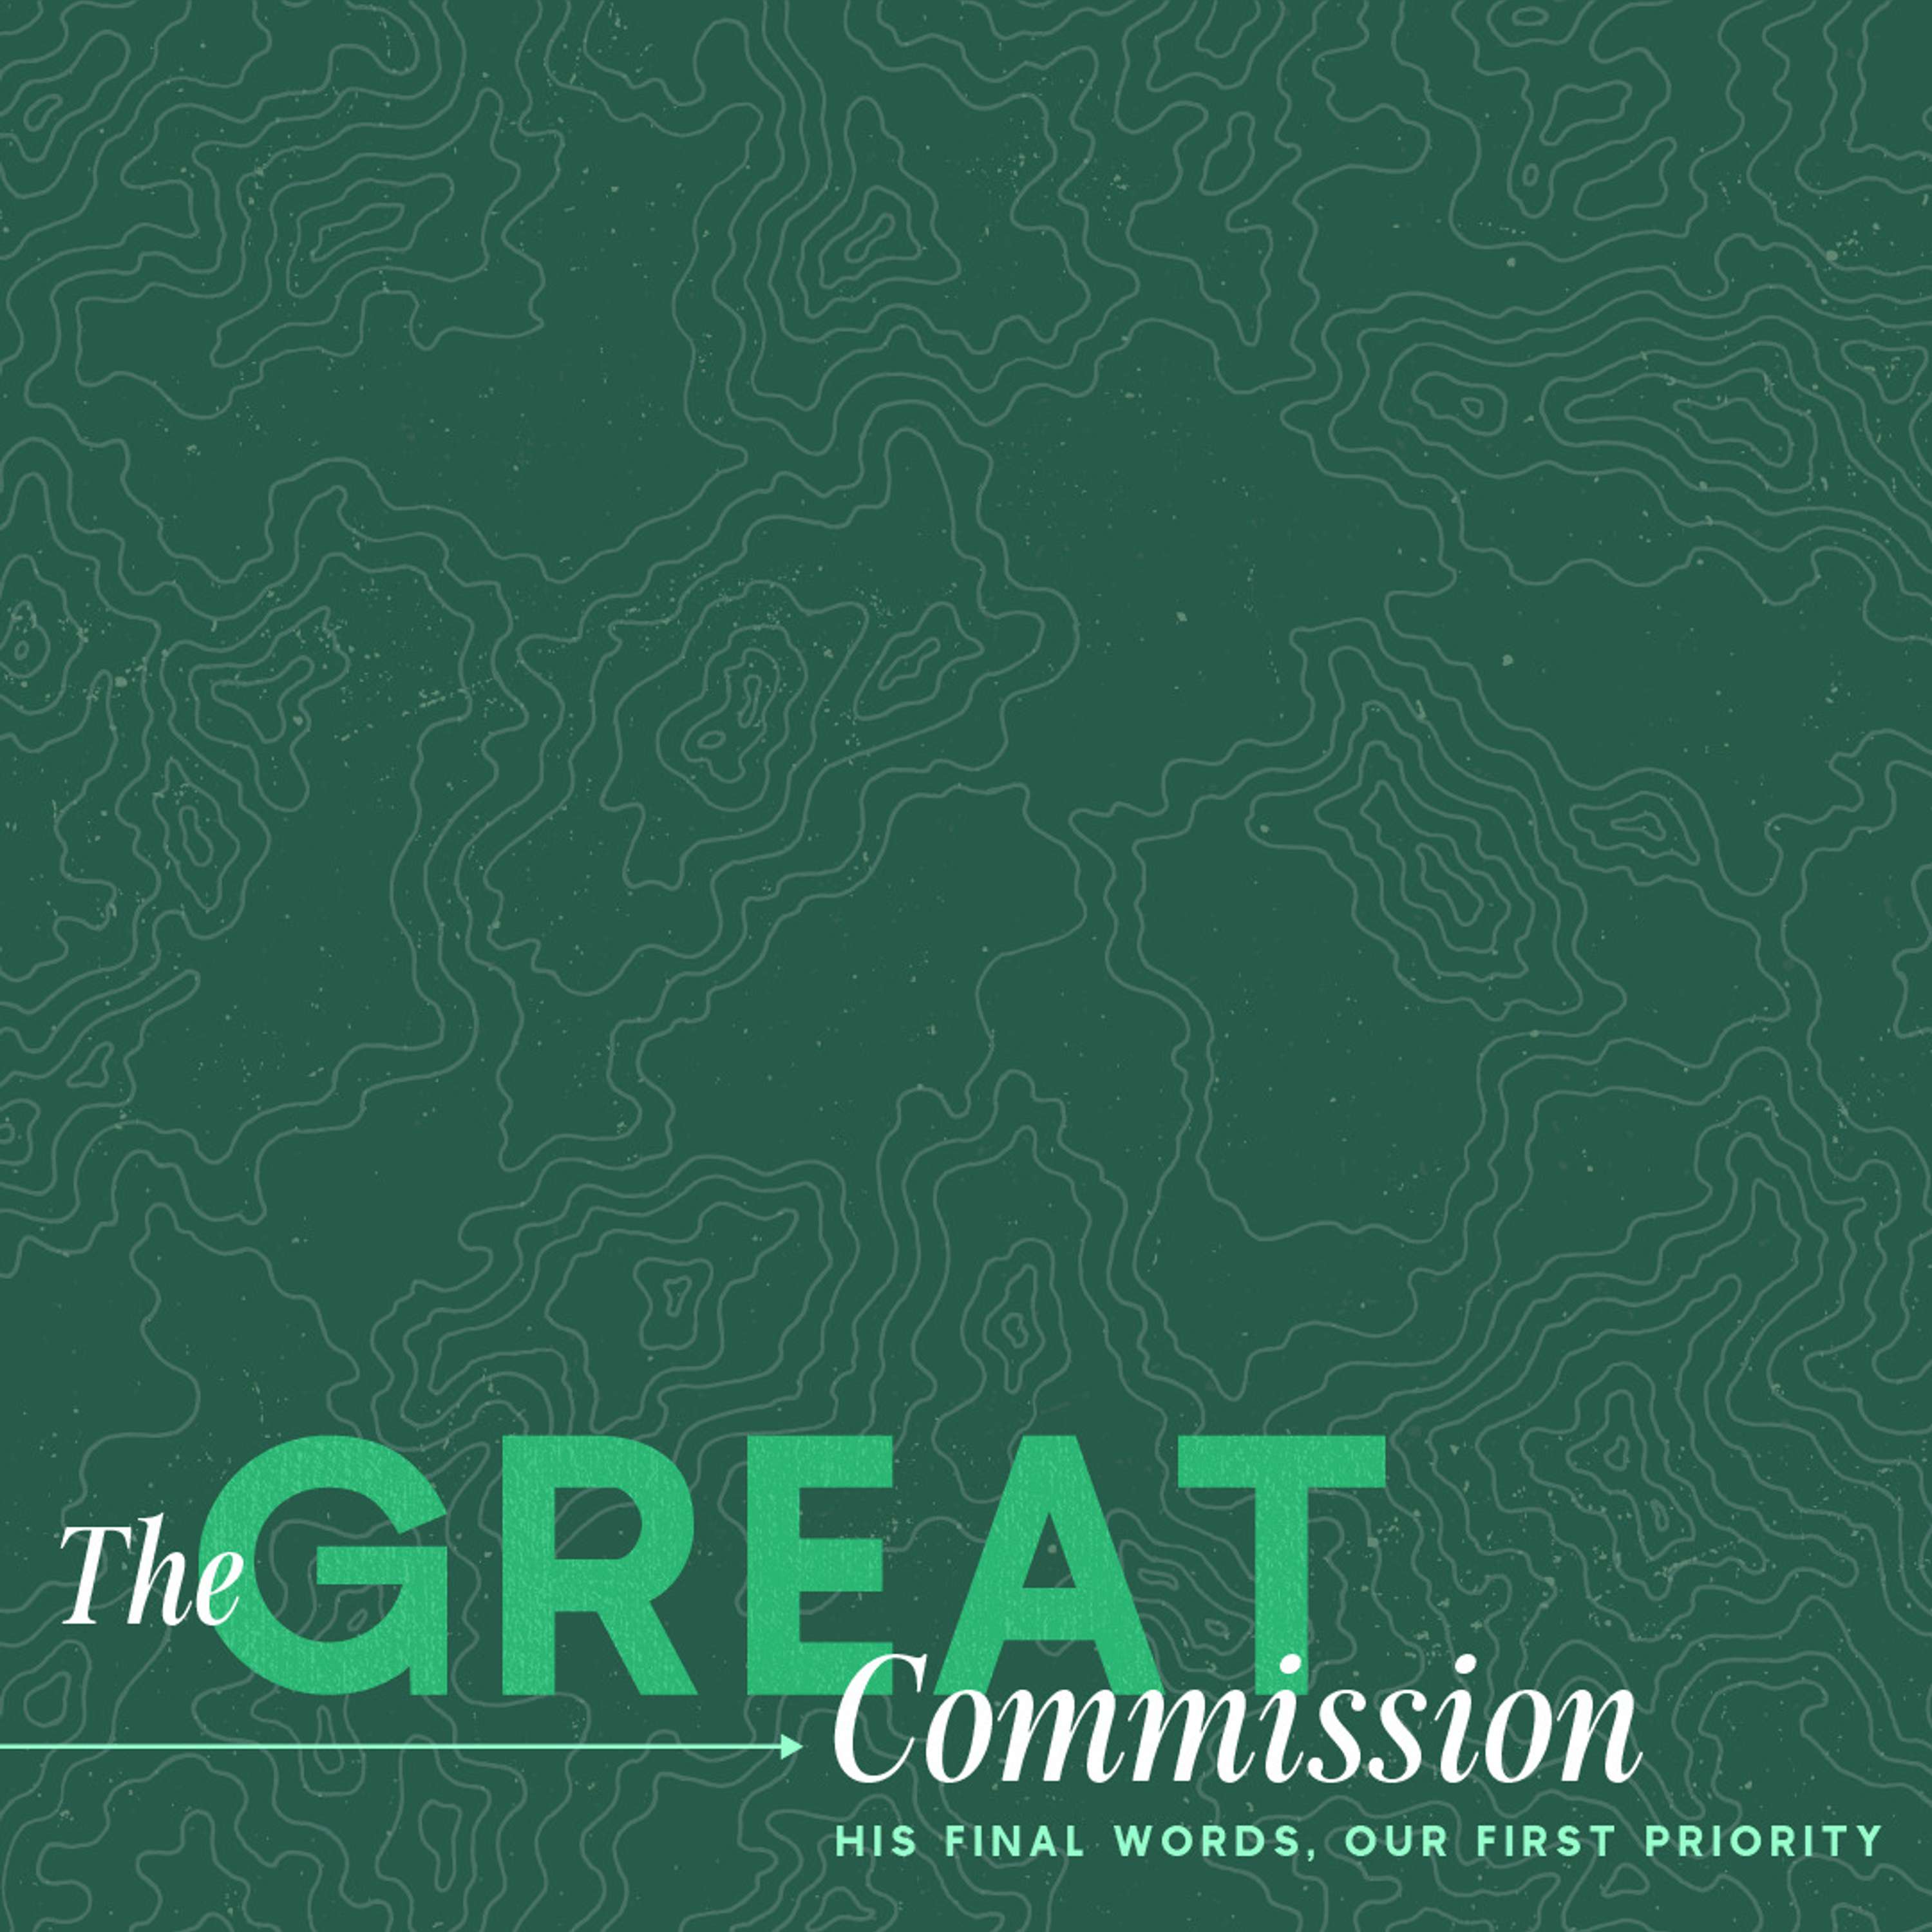 The Great Commission: All Authority